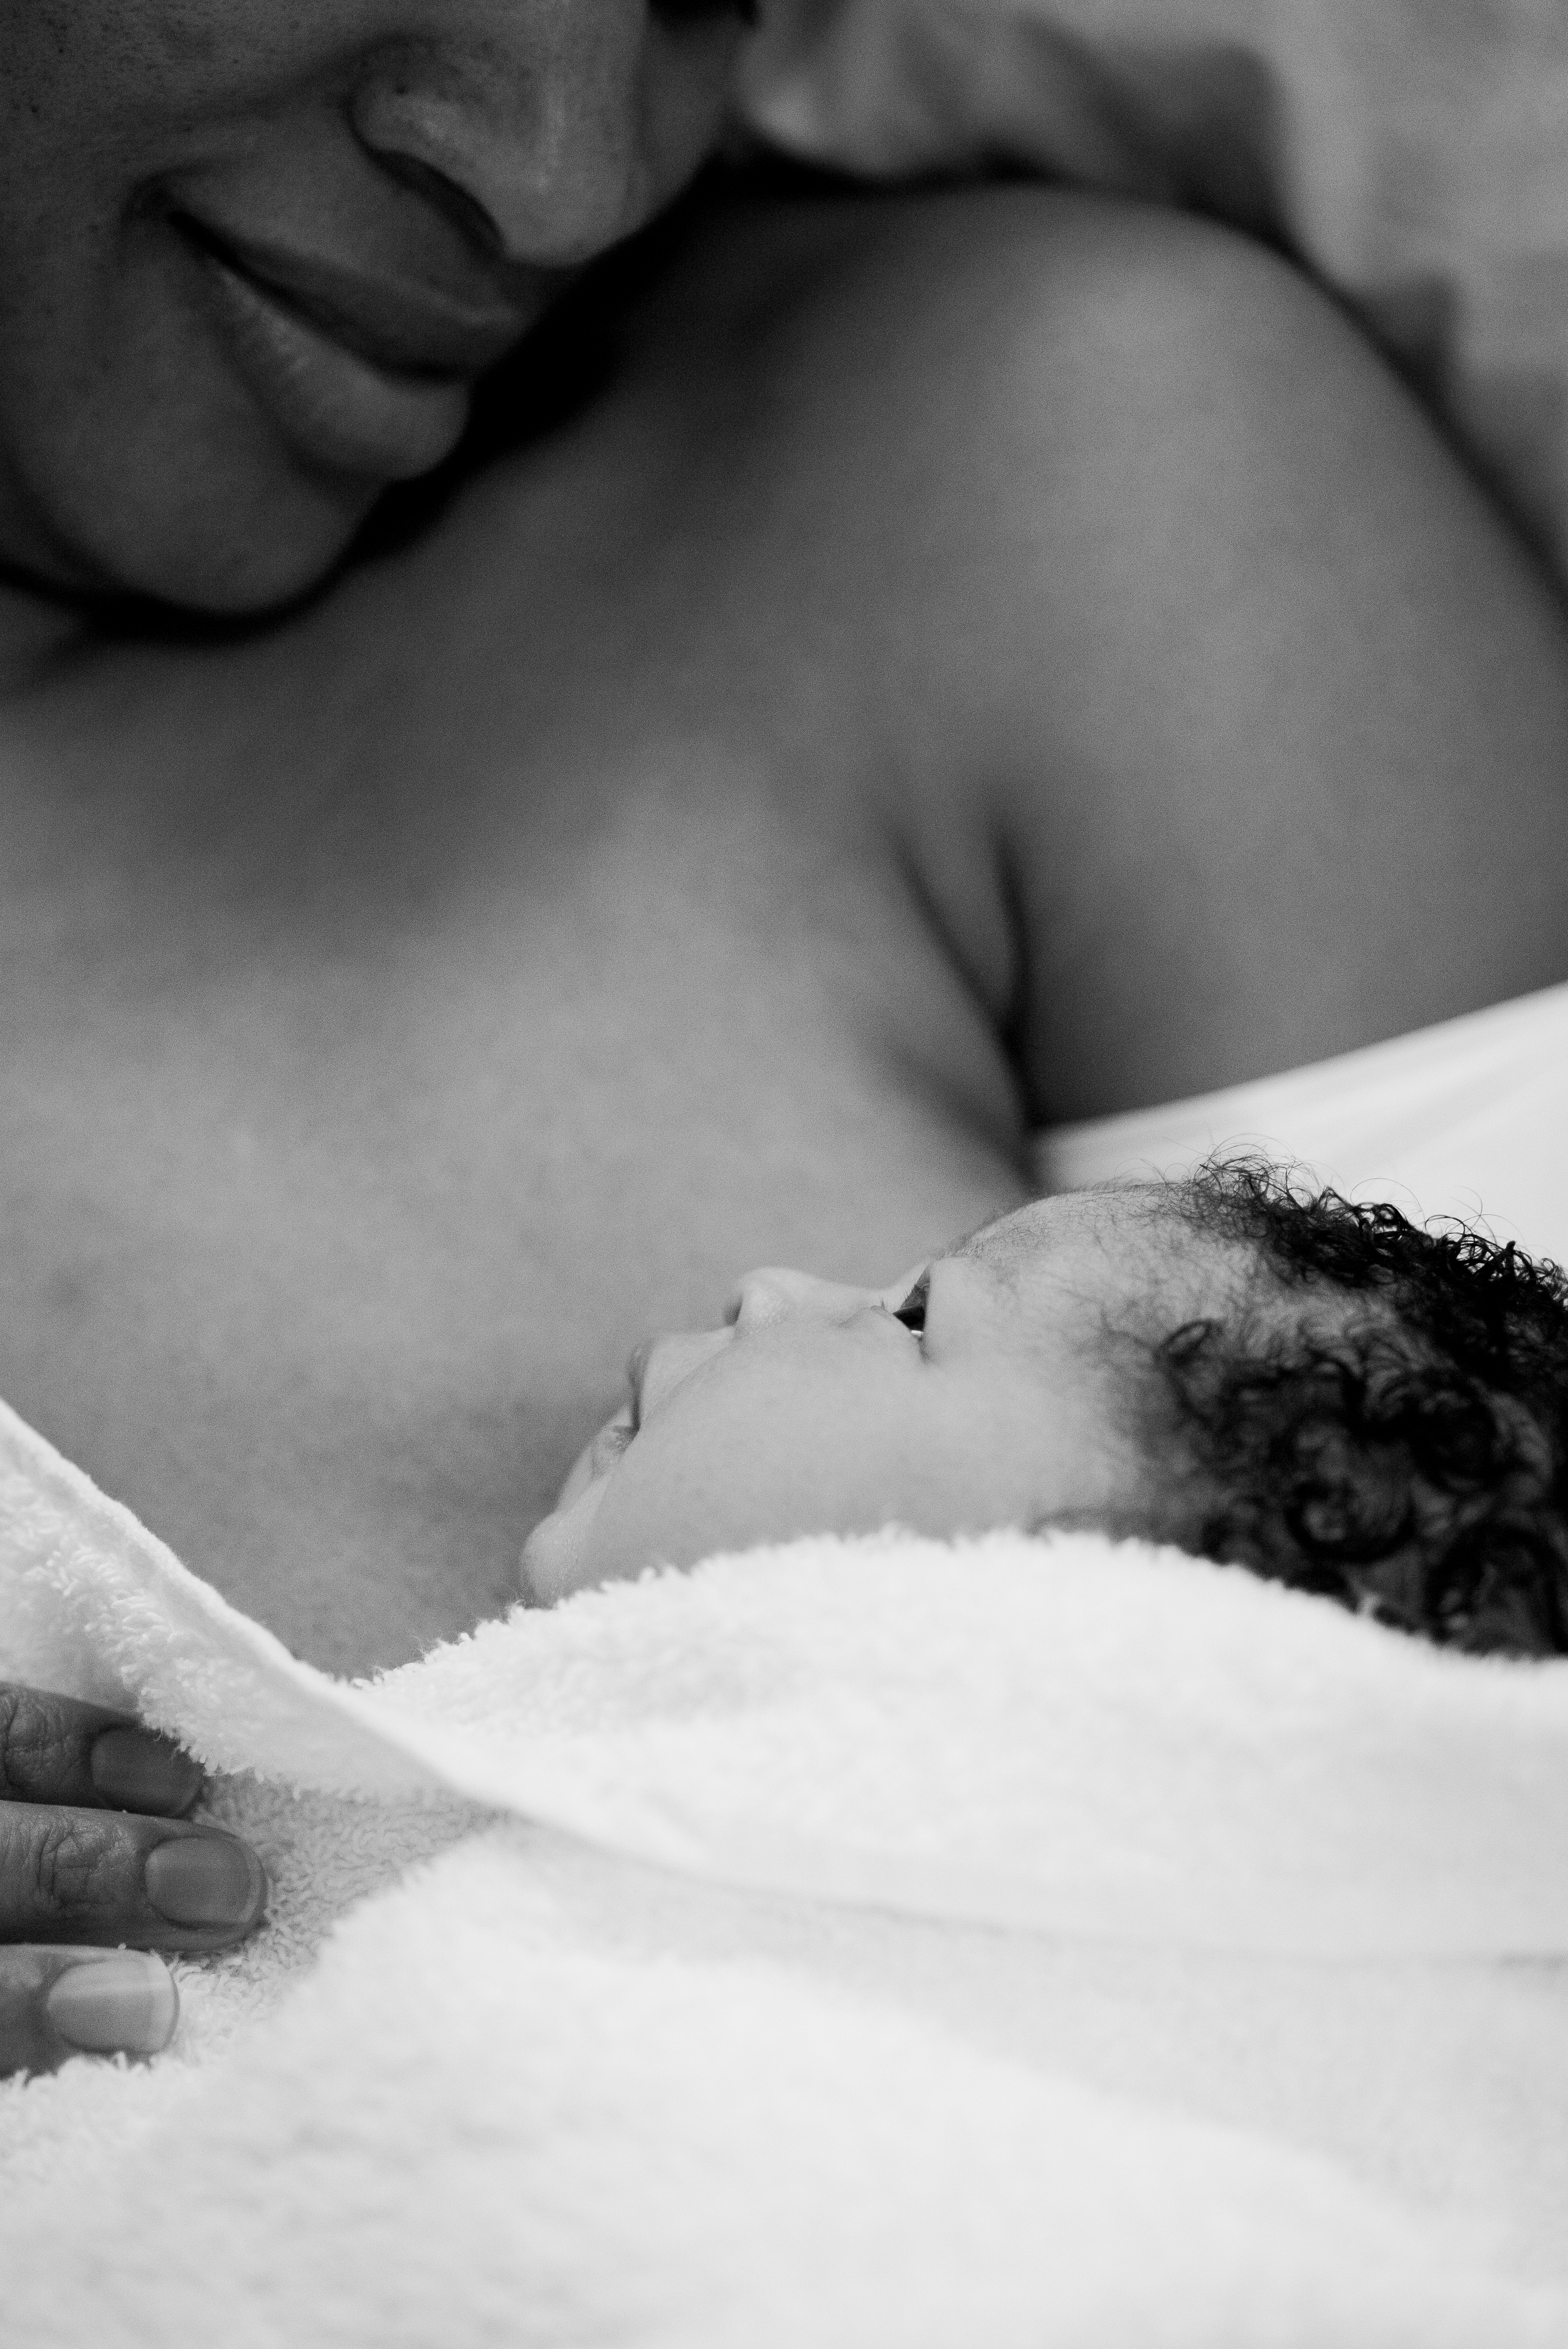 London mum cradles her newborn just after birth in hospital captured by UK Birth Photographer Aimee Durrance.